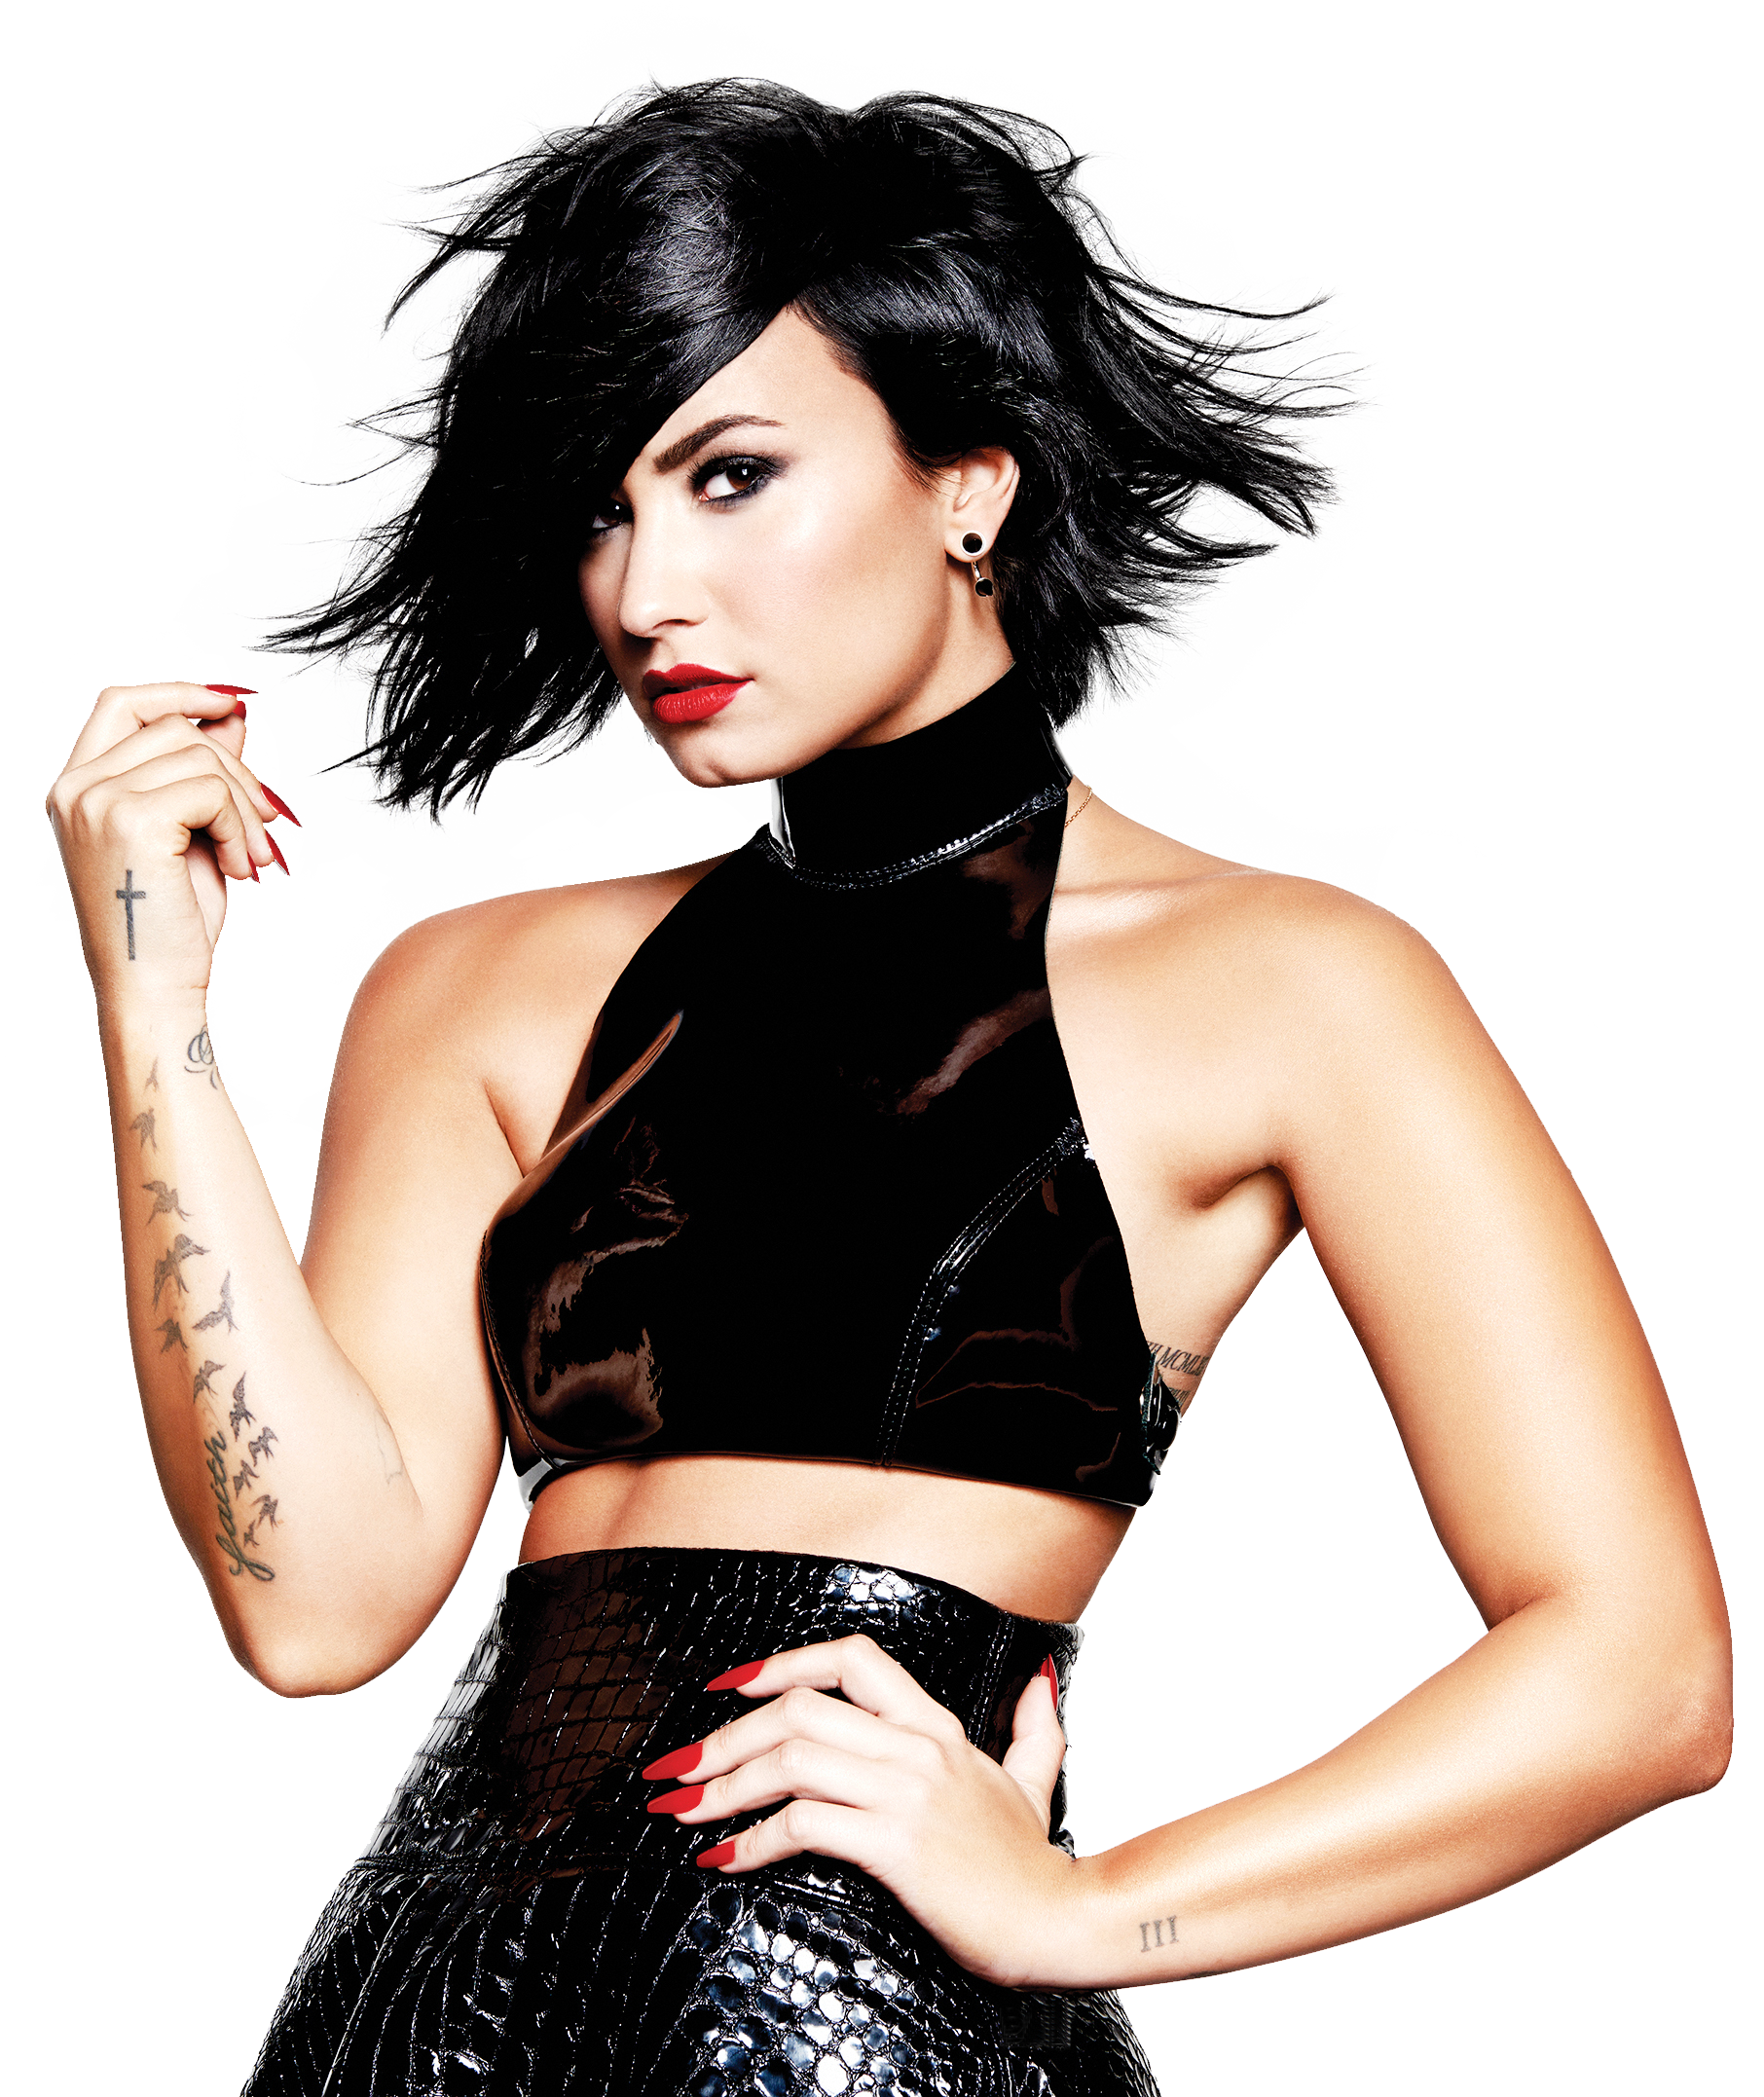 Demi Lovato PNG by maarcopngs